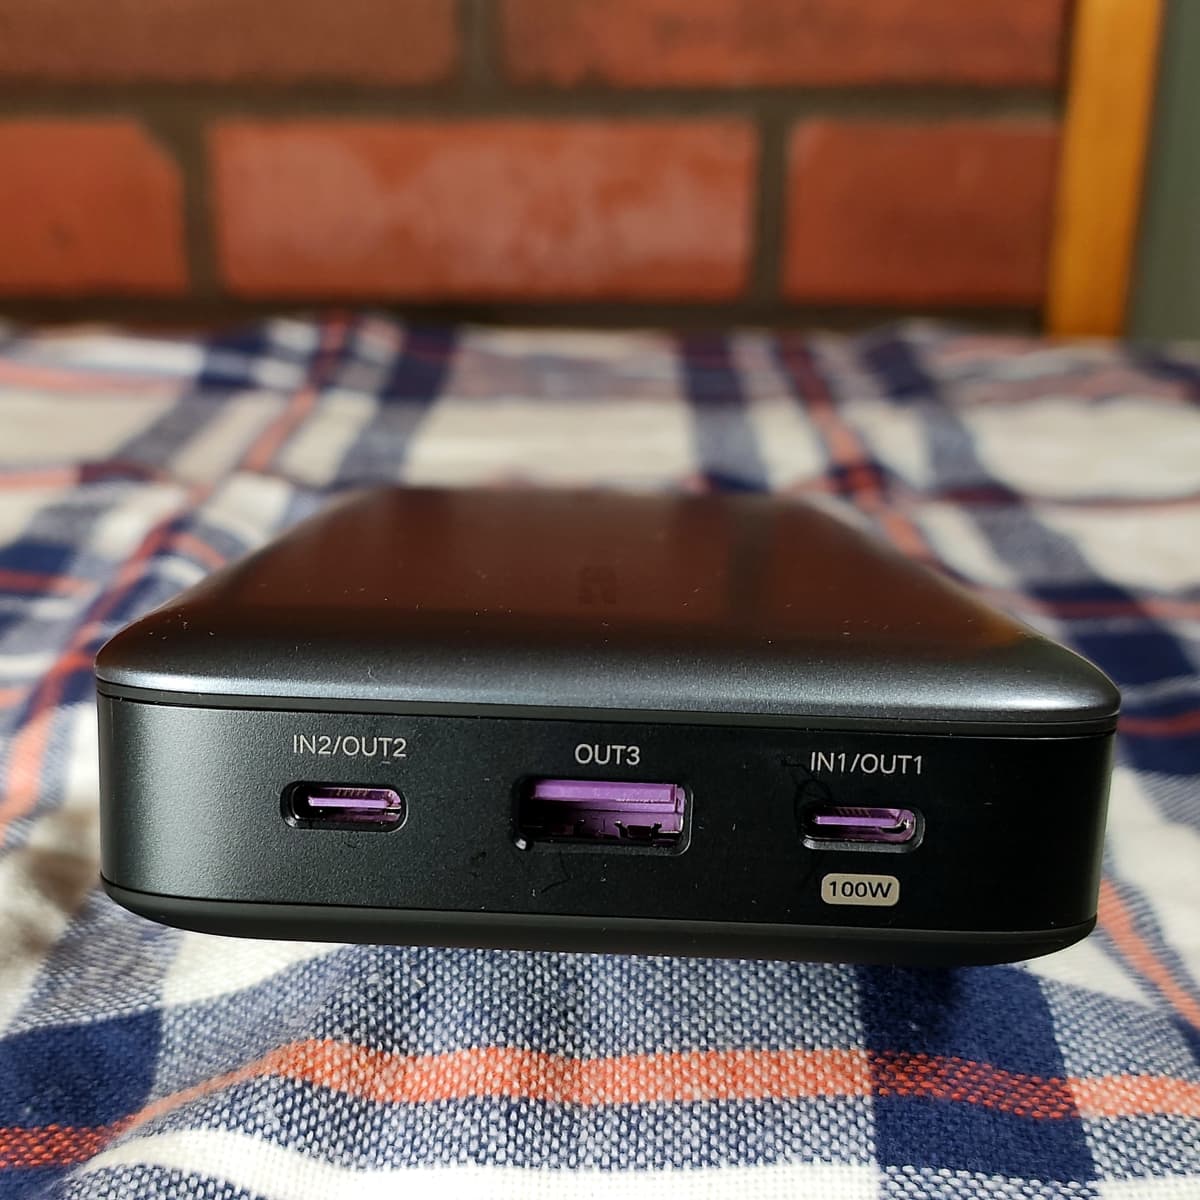 UGREEN 145W Power Bank review